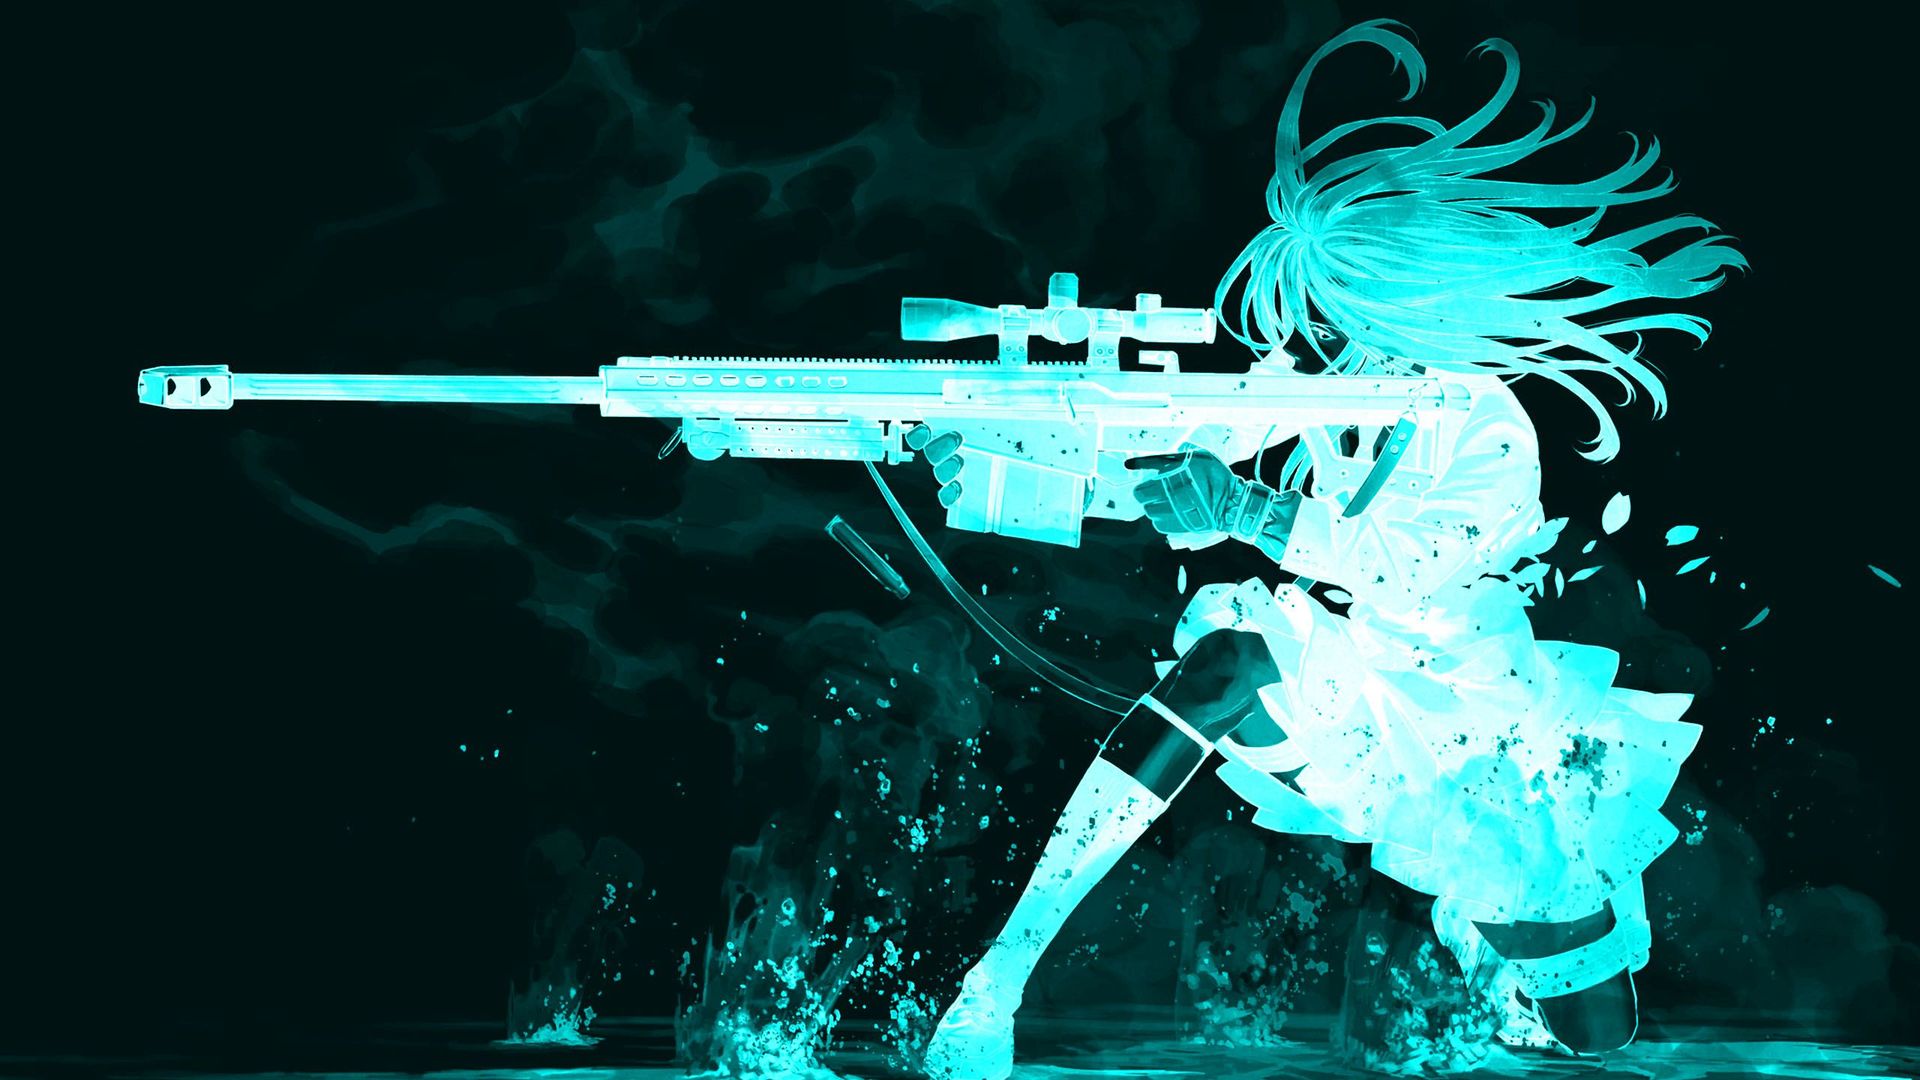 Anime Girl With Weapons Wallpaper